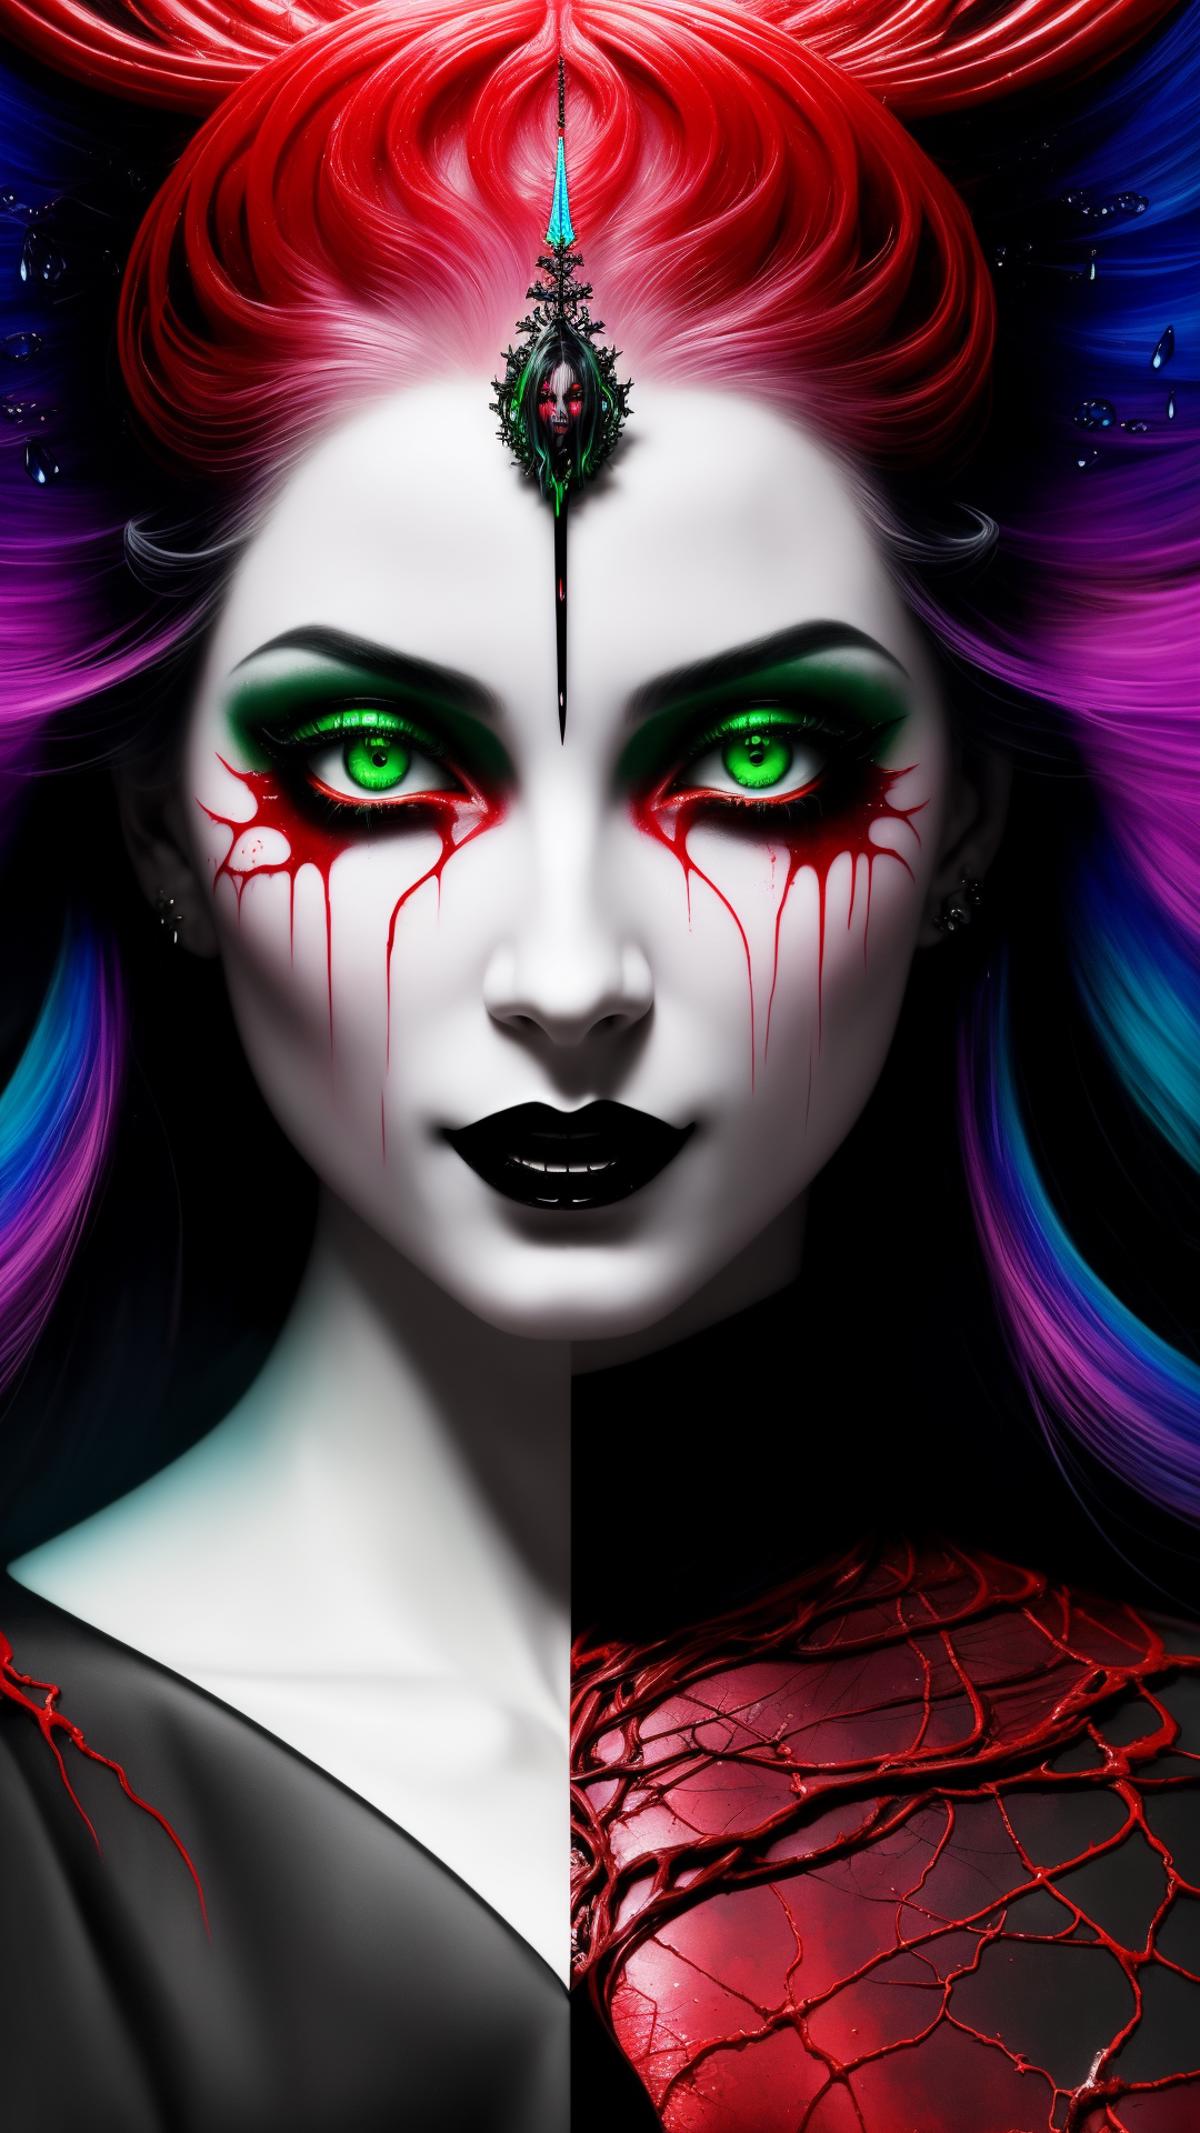 A purple haired woman with green eyes, black lipstick, and a spider web design on her face.